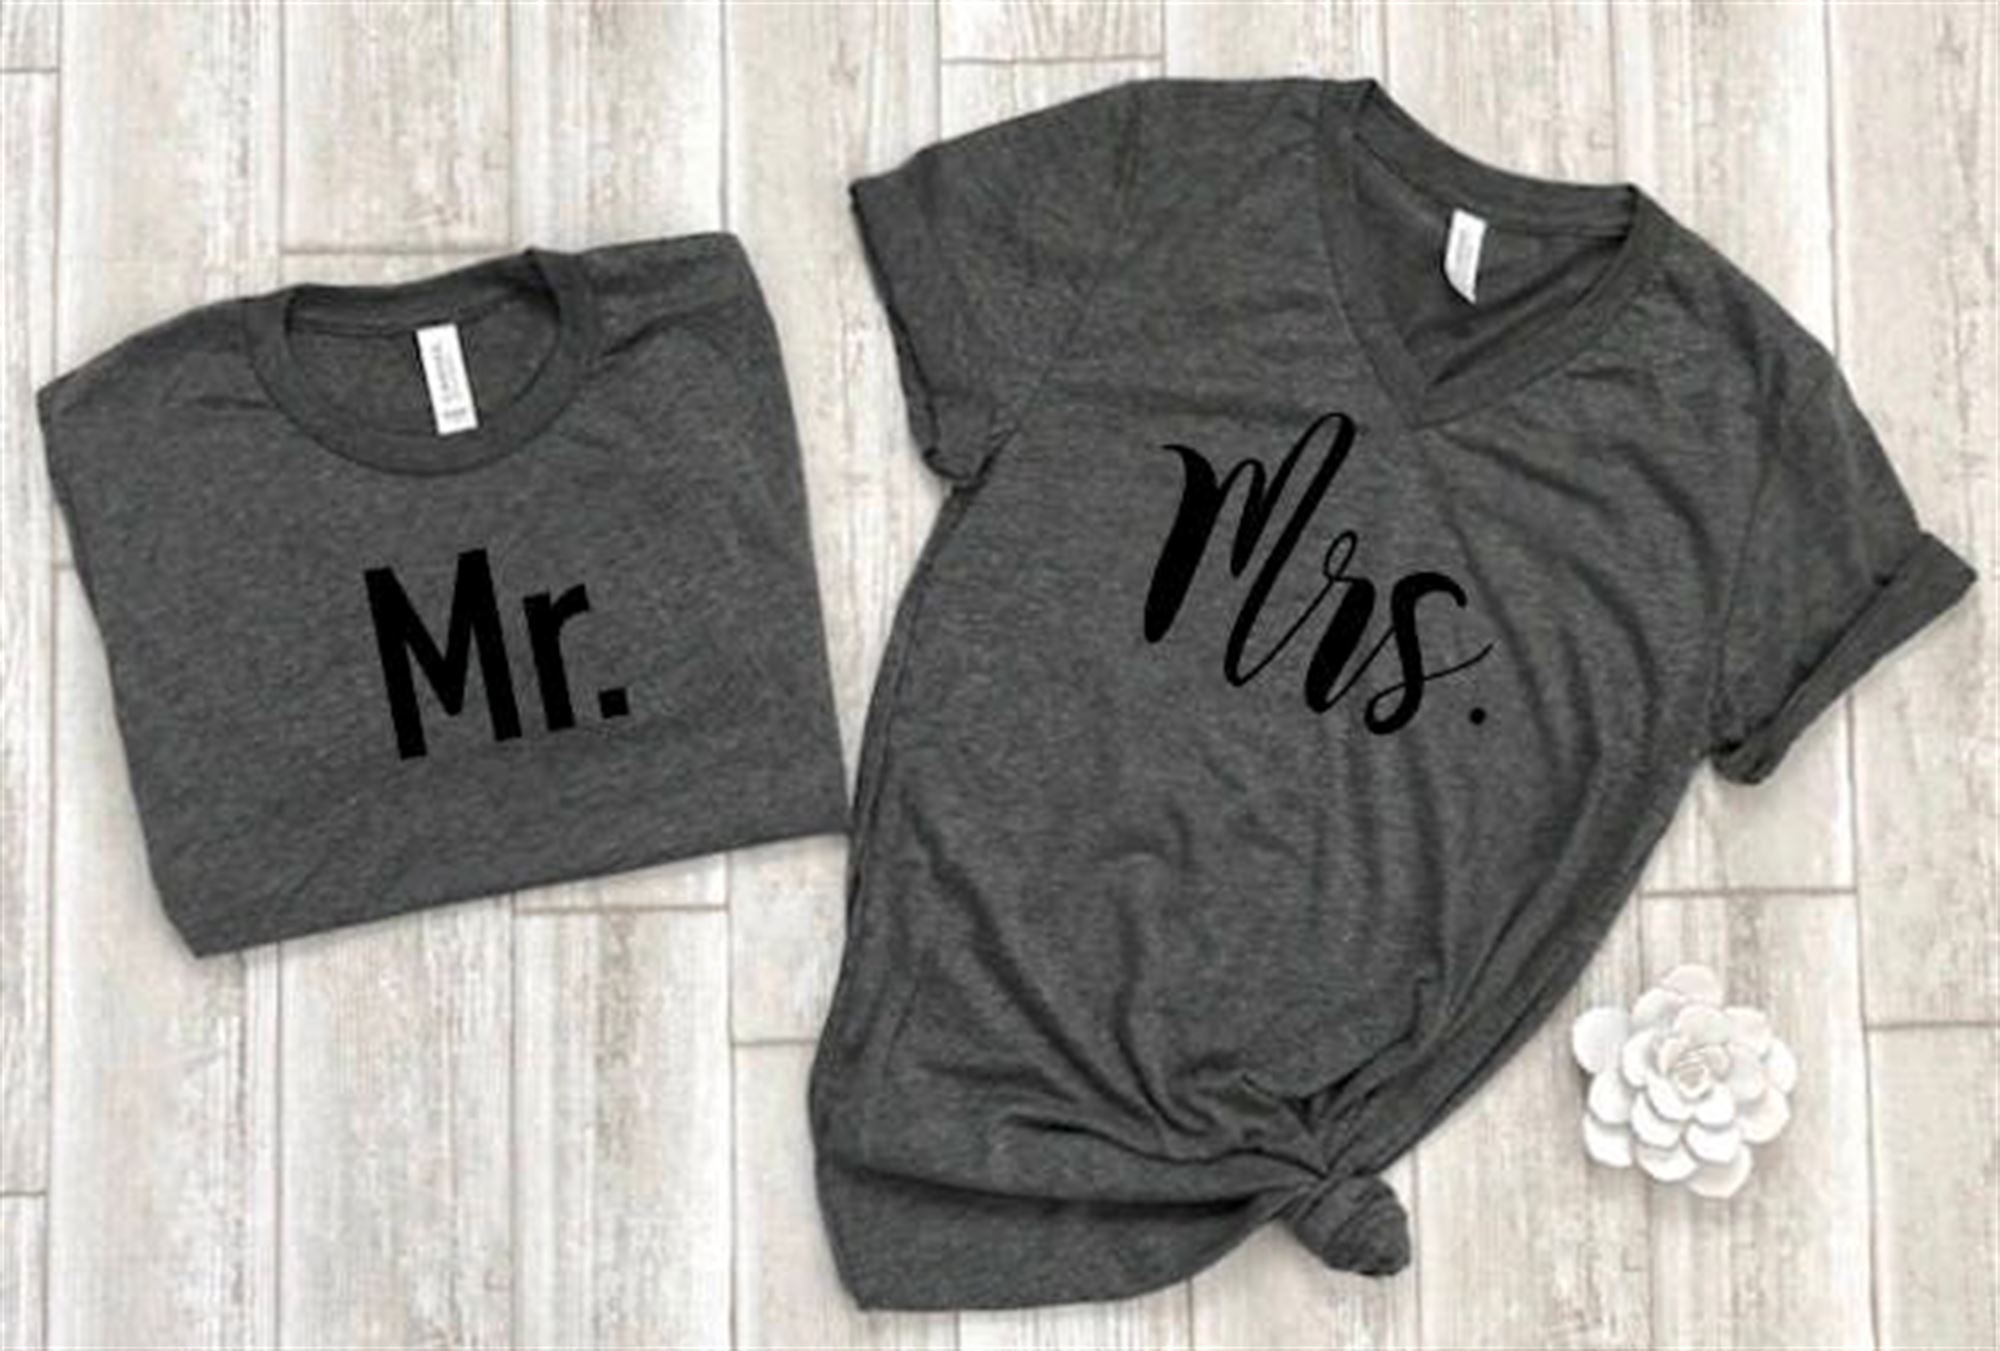 Promotions Couples Shirts Wife Husband Shirts Honeymoon Shirts Newlywed Shirts Couples Shirt Bride Shirts Groom Shirts Gift For Couple 